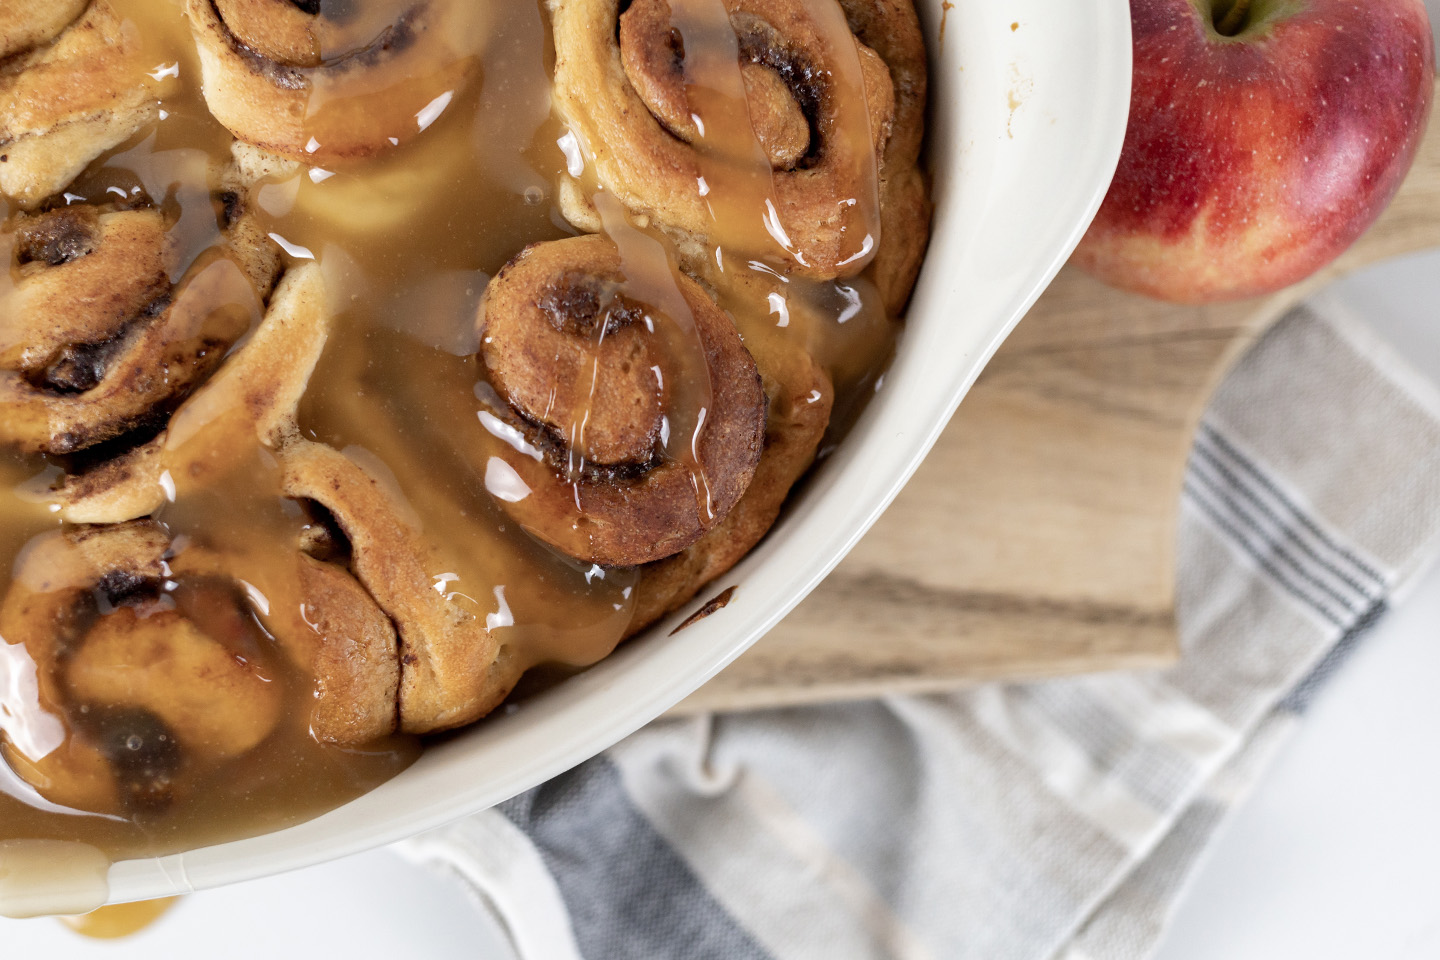 If you're looking for a fall dessert with some serious wow-factor, these caramel apple cinnamon rolls are it! Perfect to have with afternoon coffee or even for a fun breakfast.